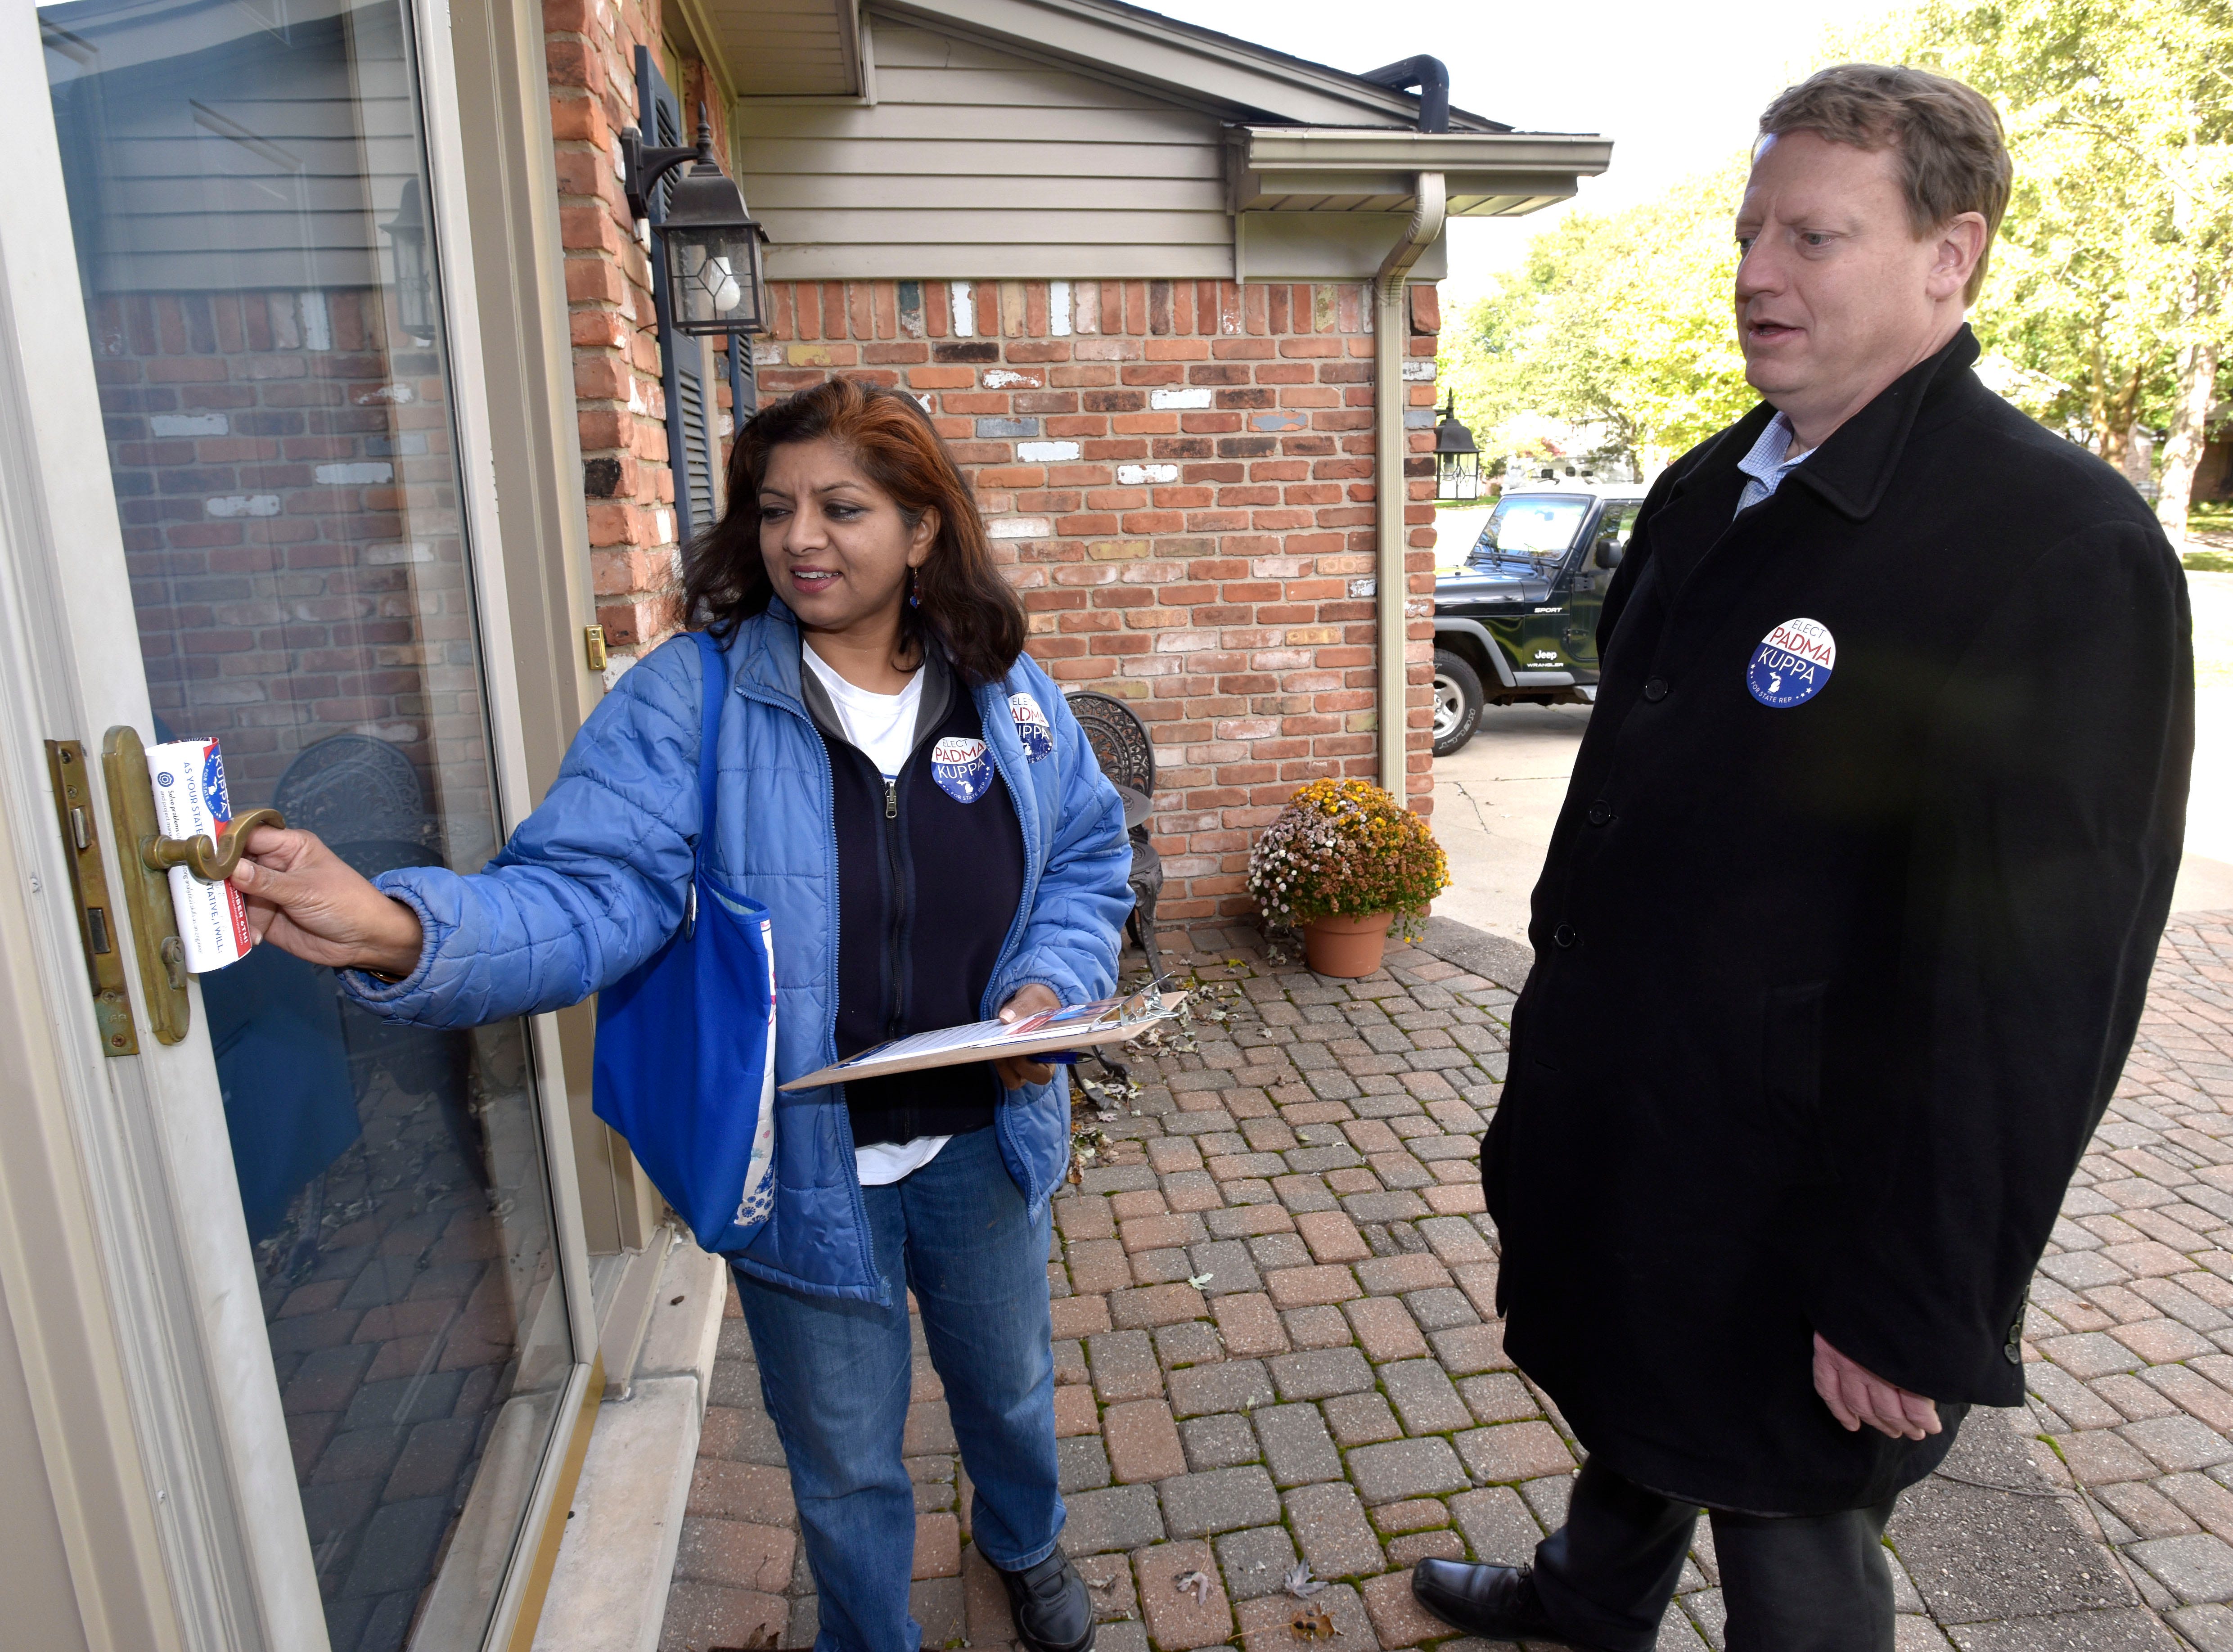 Padma Kuppa, a Democrat running for the 41st state House District that includes Troy and Clawson, puts a flyer in a door while campaigning in Troy with Tim Greimel, minority leader of the state House.